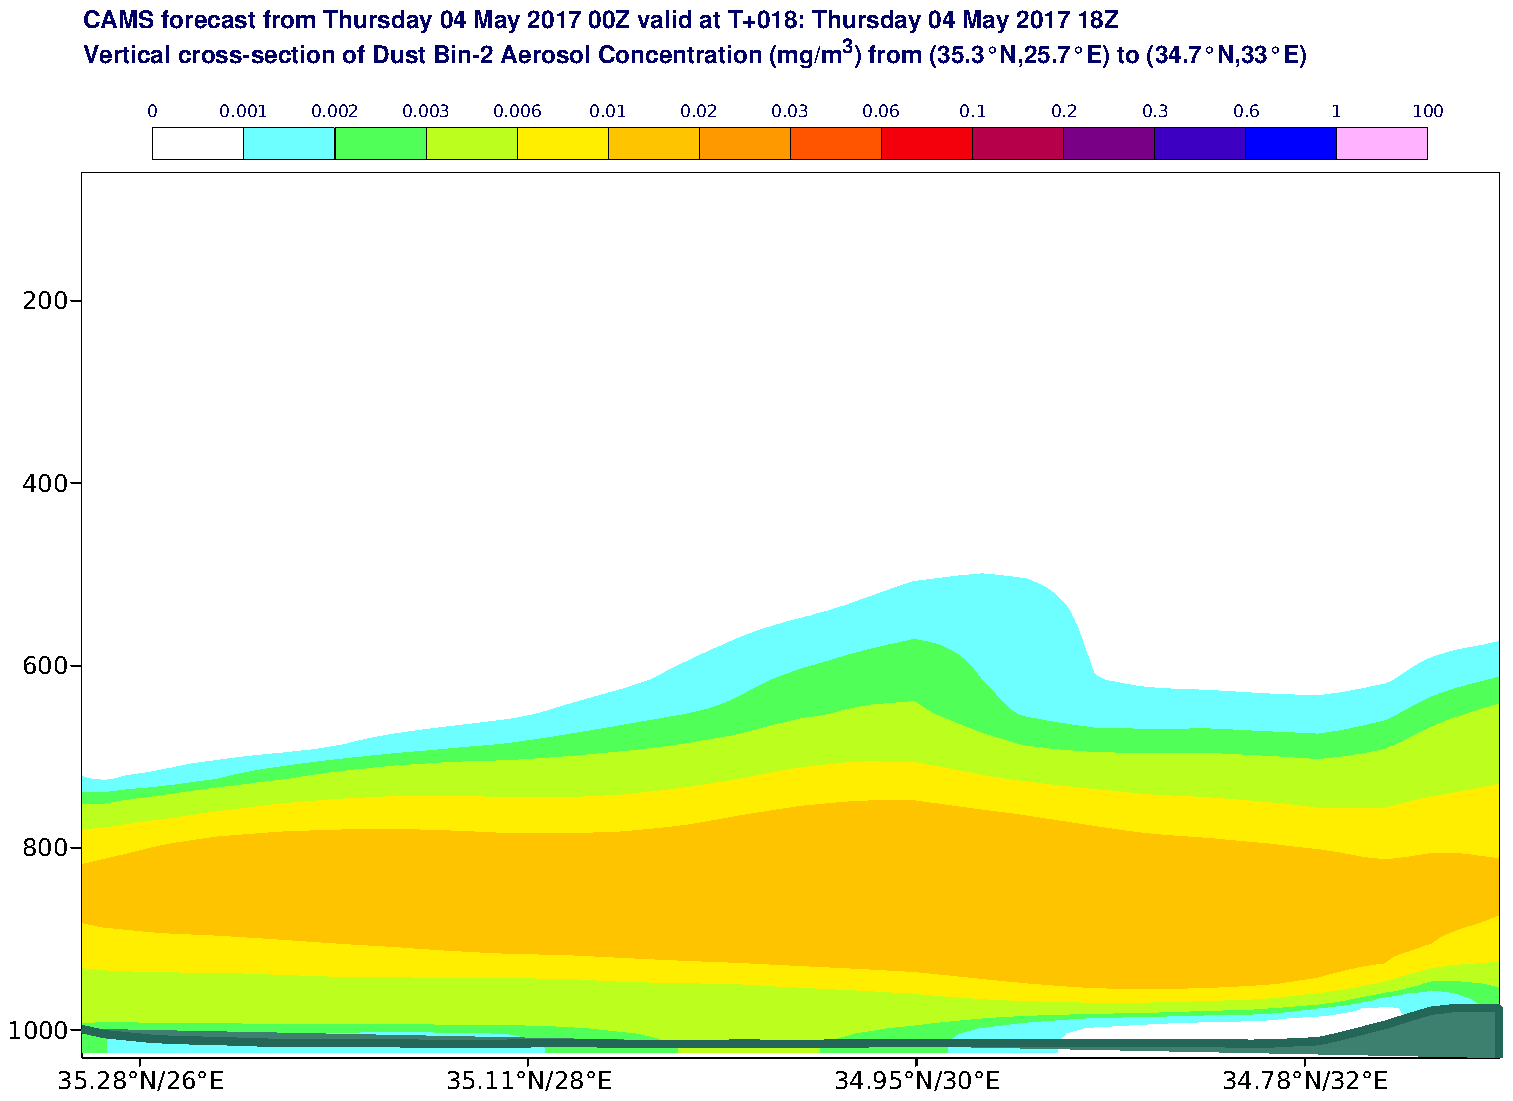 Vertical cross-section of Dust Bin-2 Aerosol Concentration (mg/m3) valid at T18 - 2017-05-04 18:00